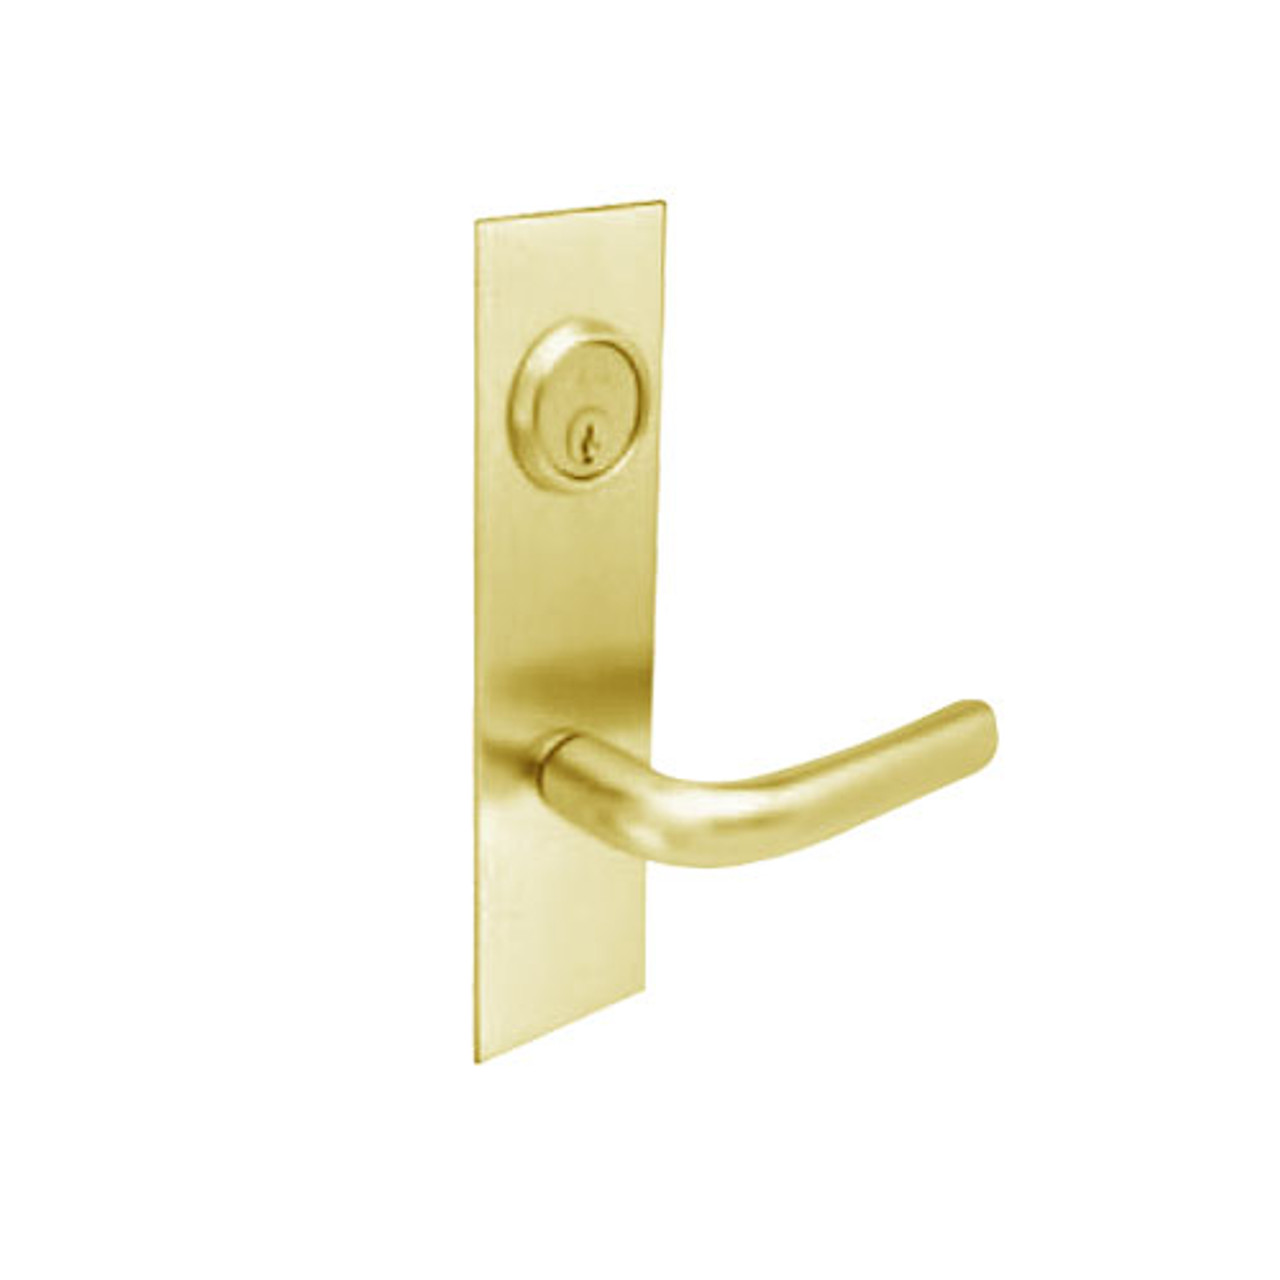 BM09-NH-04 Arrow Mortise Lock BM Series Full Dummy Lever with Neo Design and H Escutcheon in Satin Brass